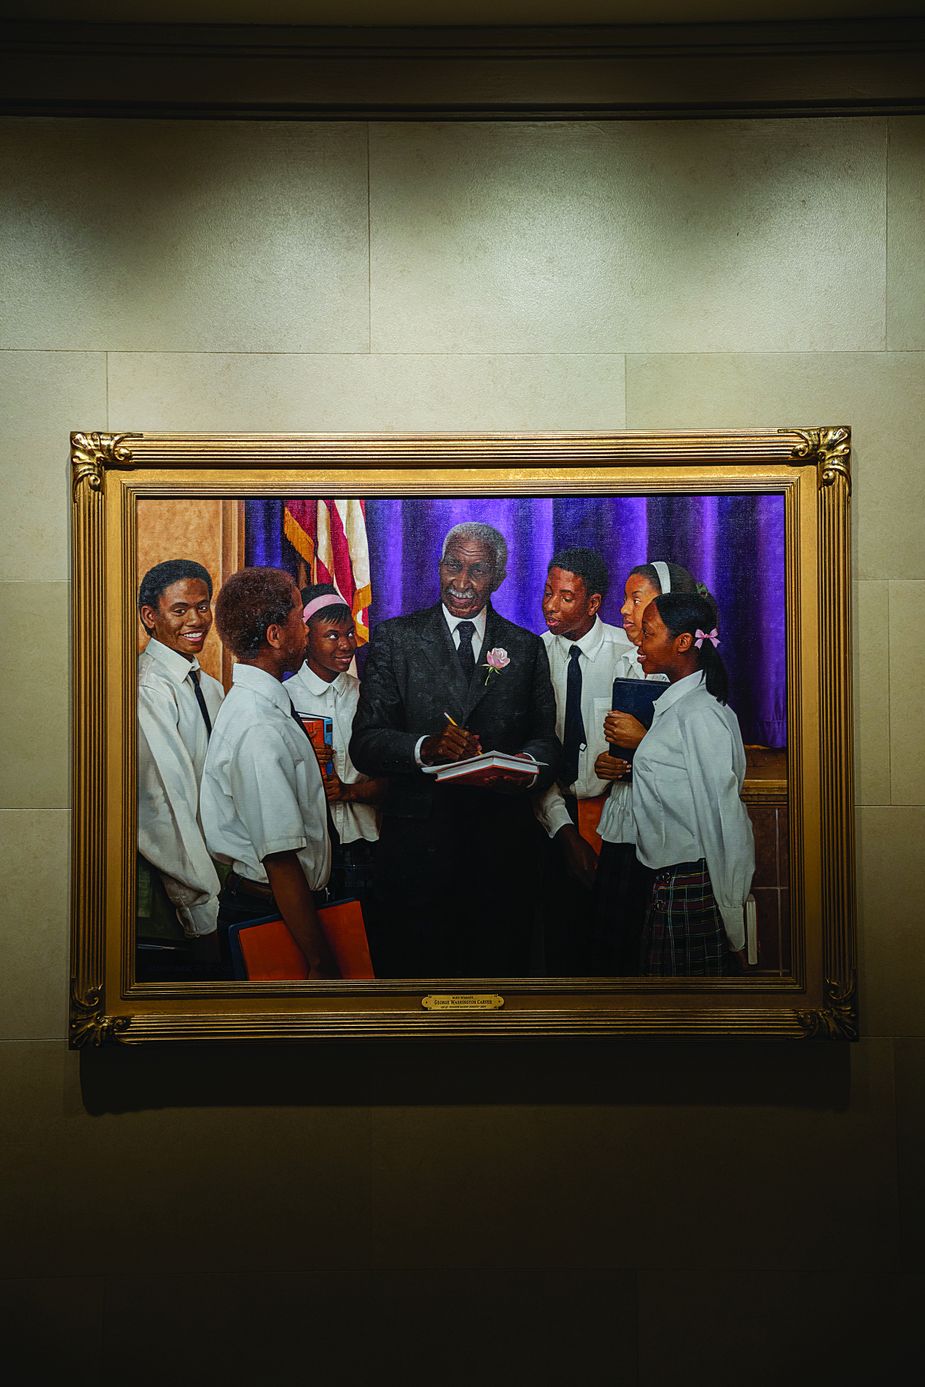 Mike Wimmer’s "George Washington Carver" in Tulsa is one of several works honoring black leaders in a first-floor gallery. Photo courtesy Oklahoma Legislative Service Bureau